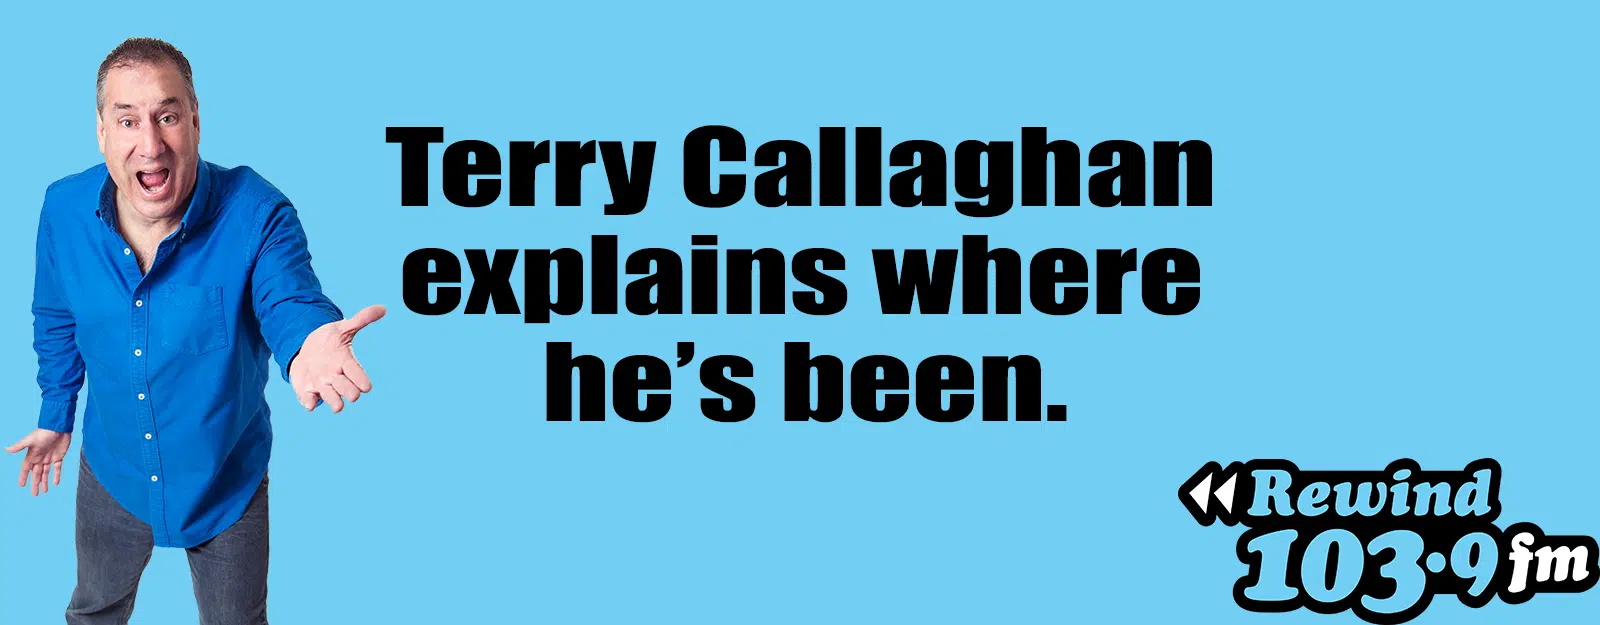 Terry Callaghan Explains Where He's Been